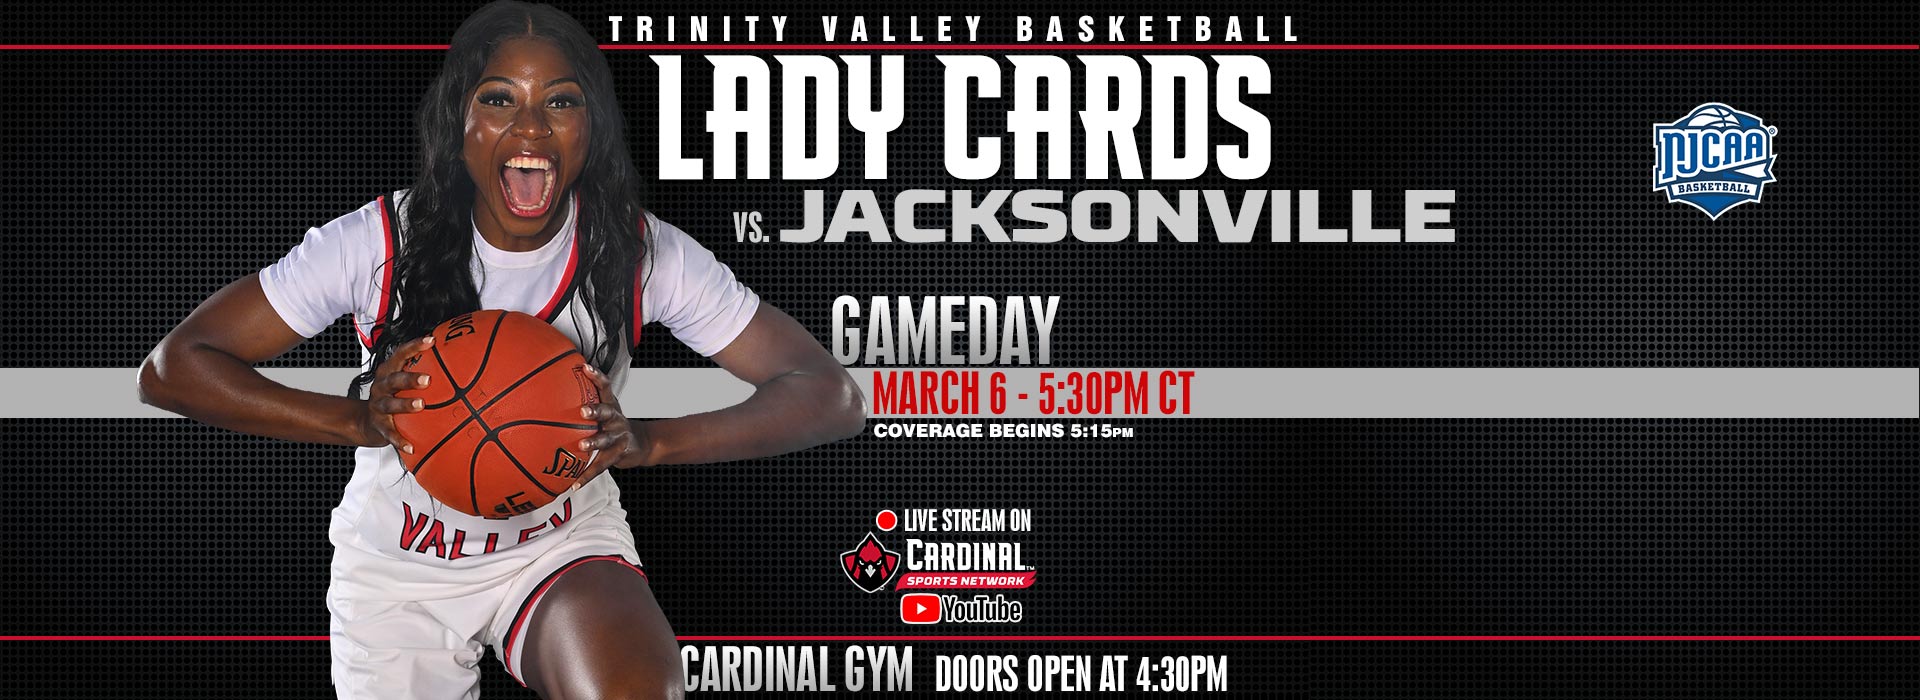 Trinity Valley Basketball Lady Cards vs. Jacksonville. Gameday March 6, 5:30pm CT. Coverage begins 5:15pm.  Live stream on Cardinal Sports Network YouTube channel.  Cardinal Gym doors open at 4:30pm.